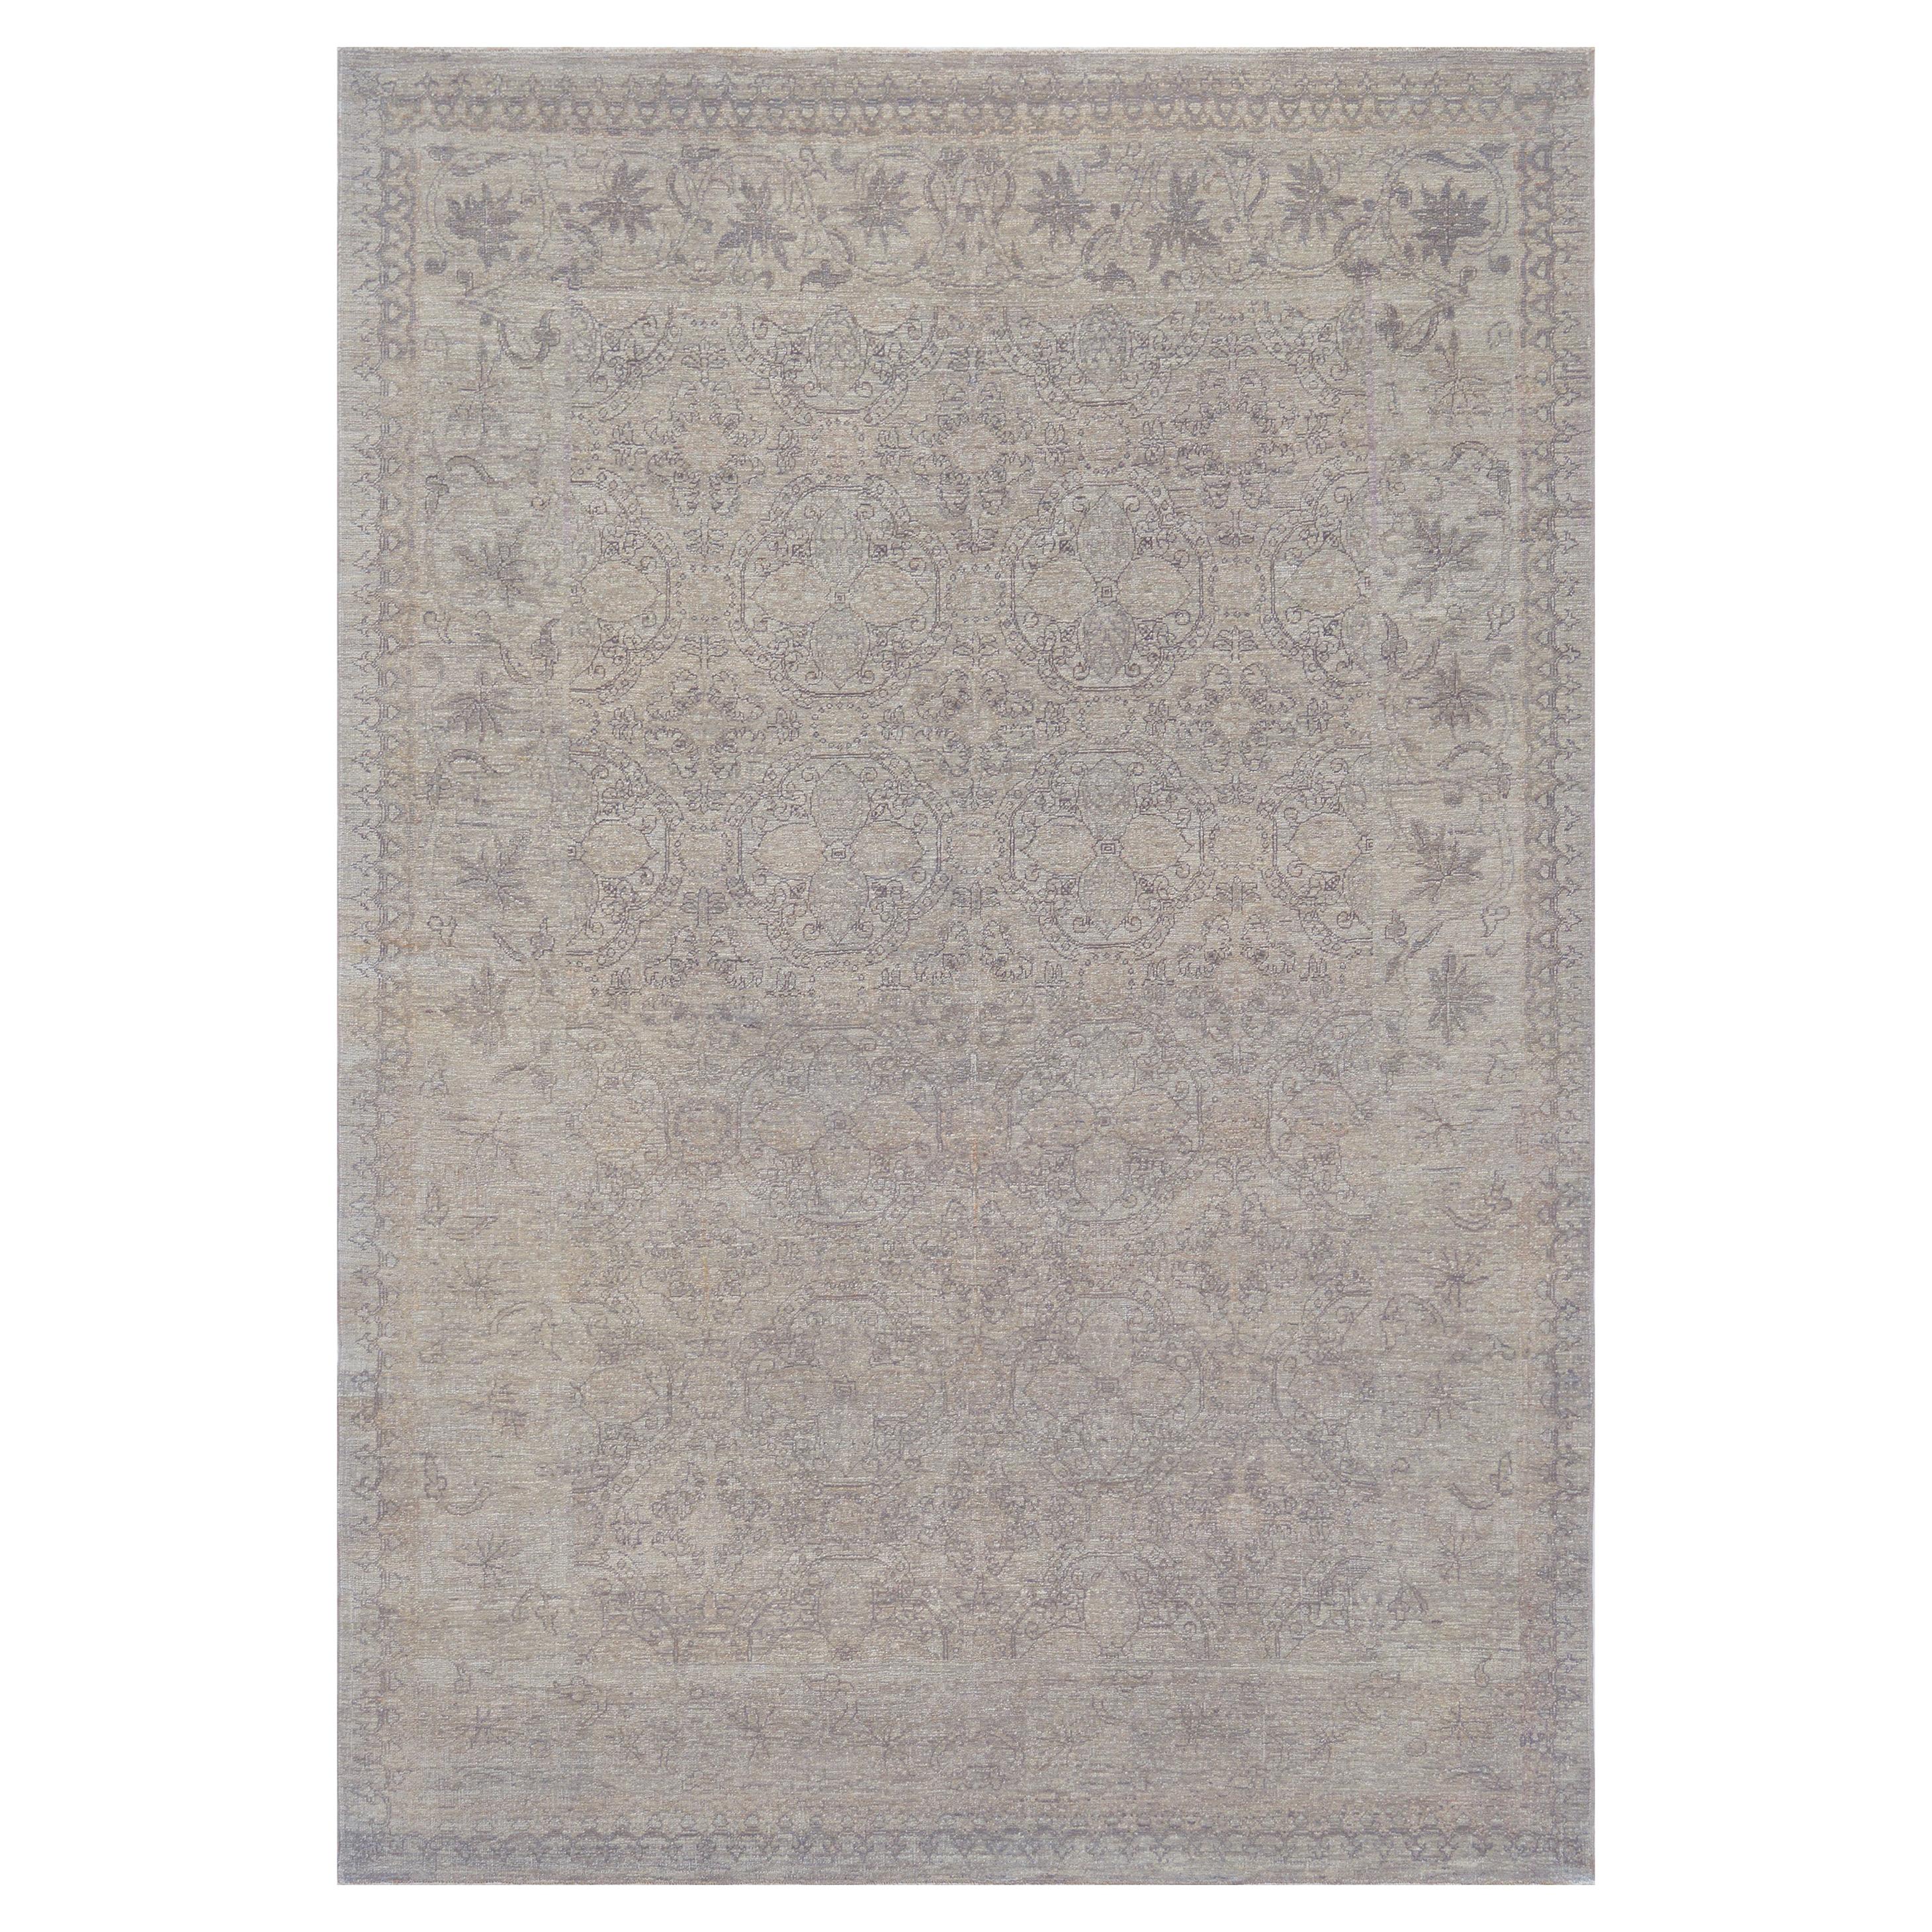 100% Wool Hand-knotted Ivory Floral Tabriz Inspired Rug